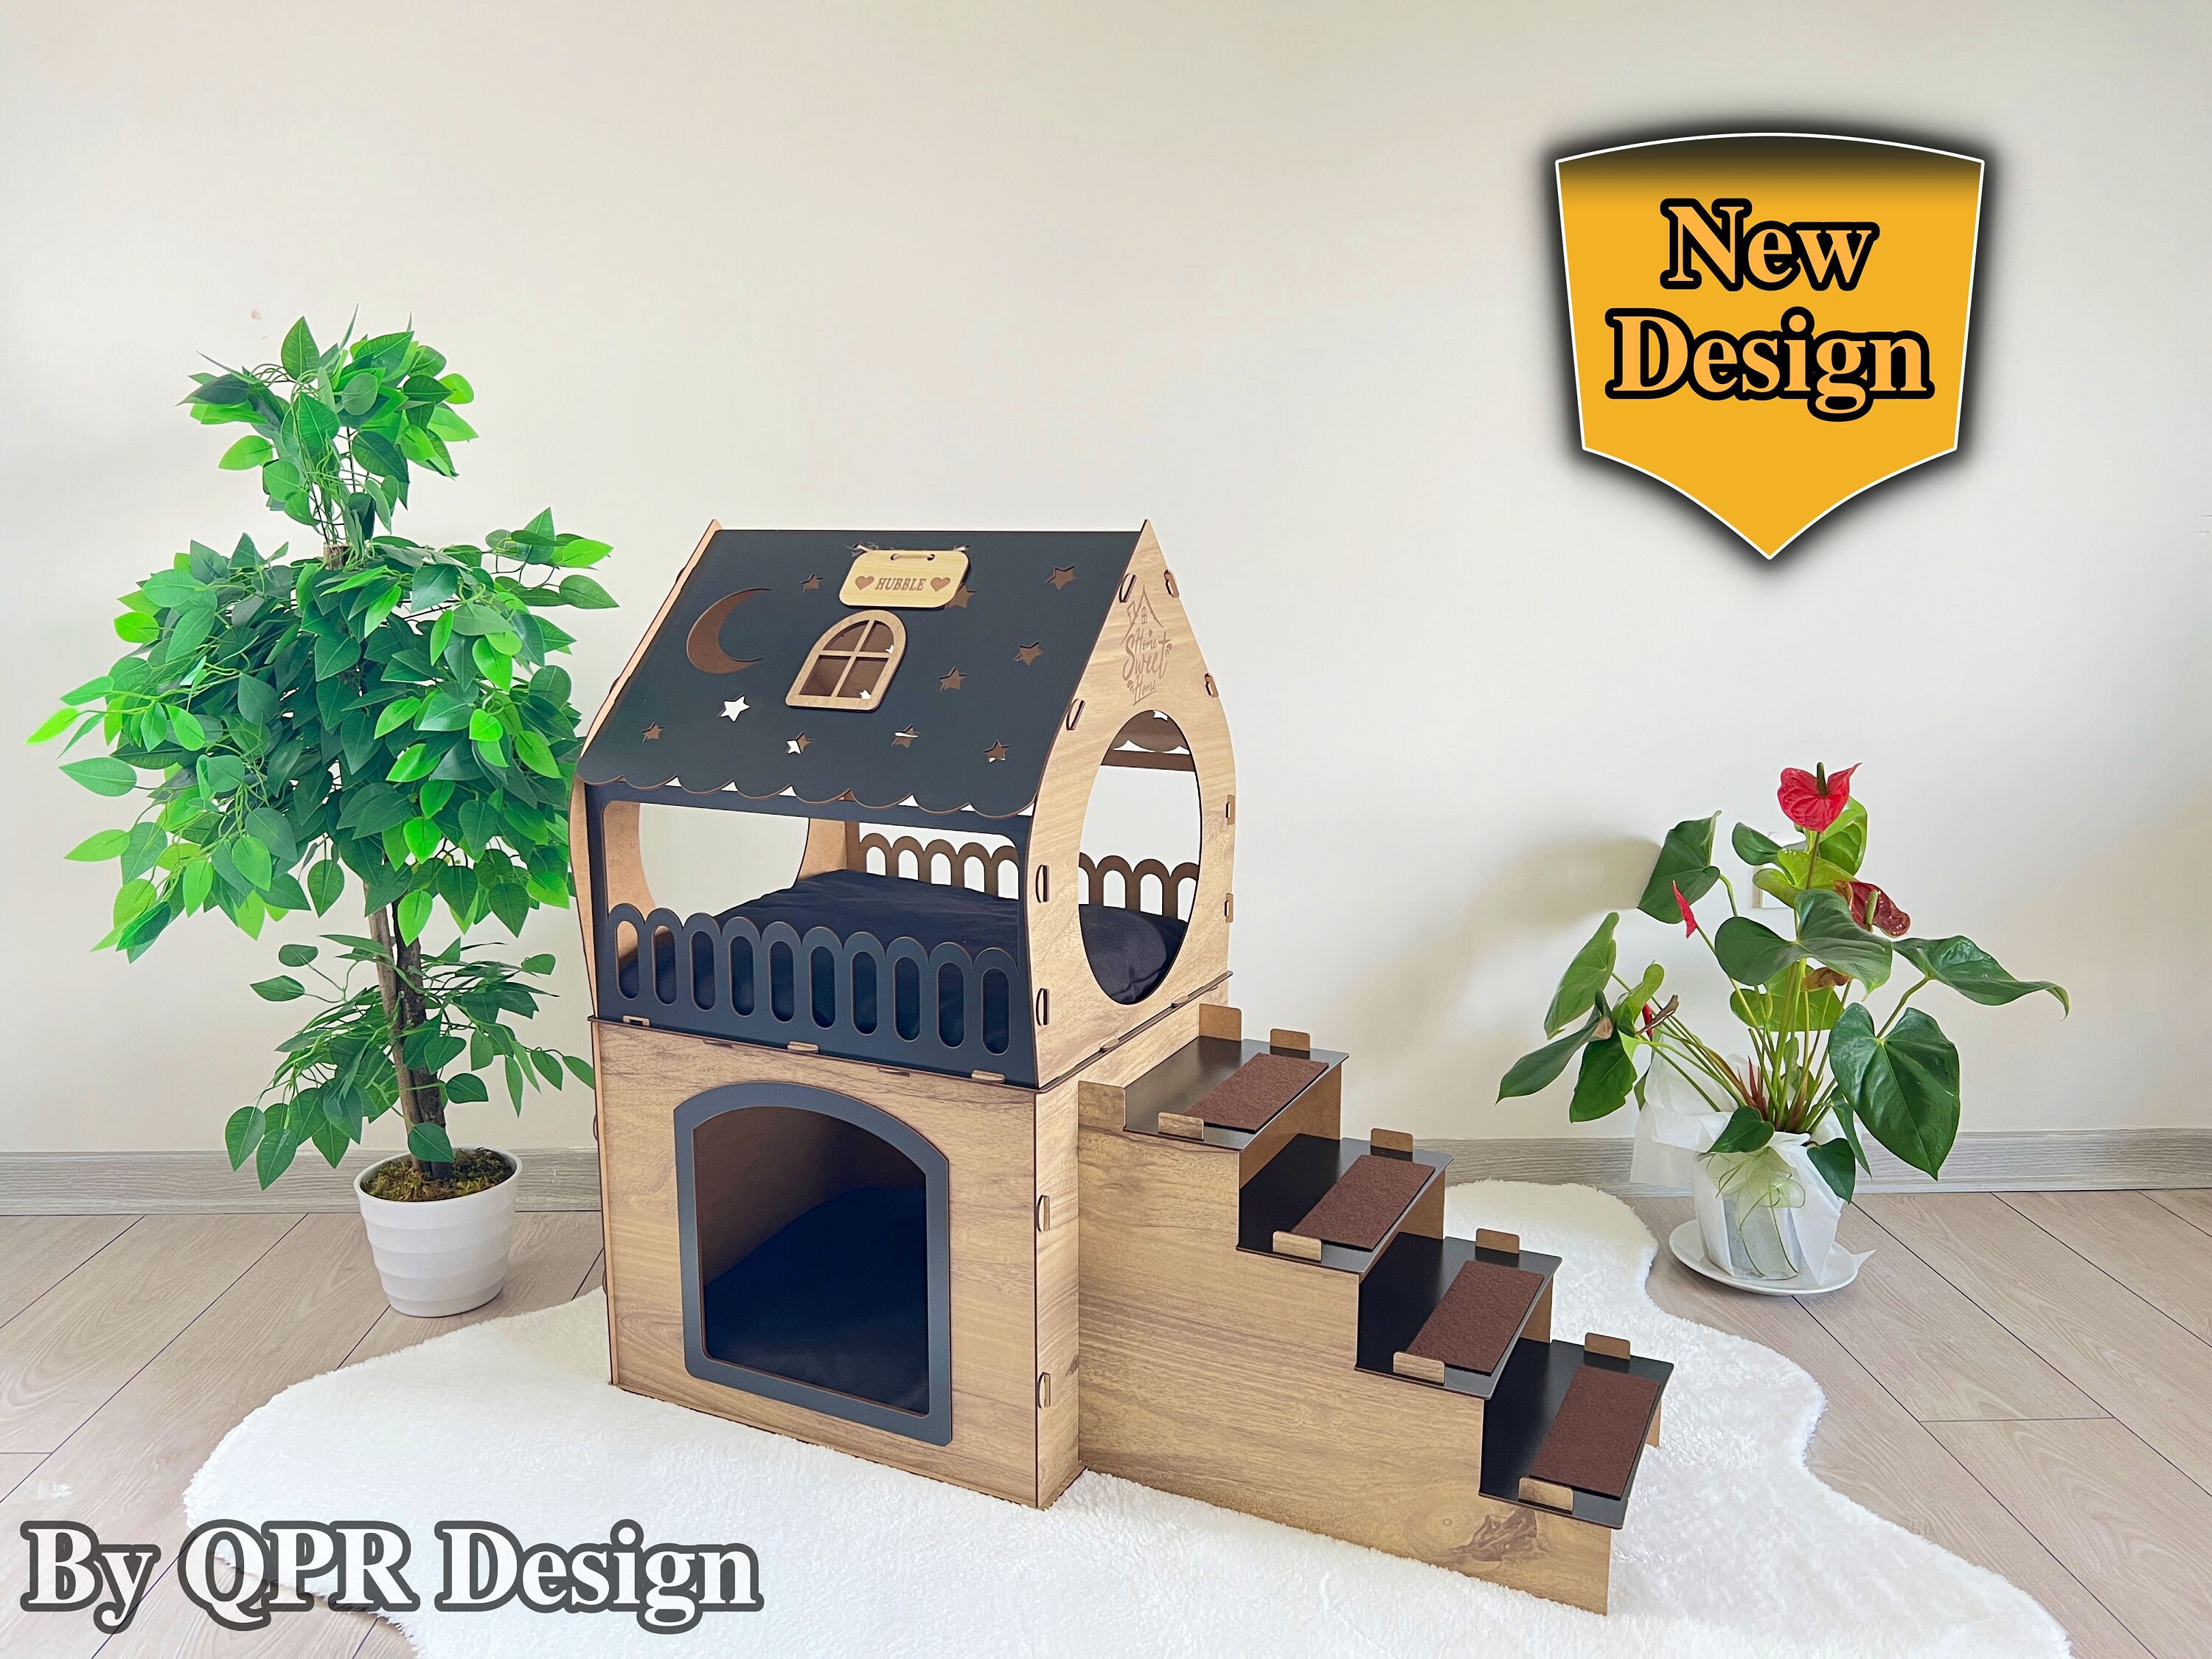 Tassel Castle, Hide-out, Hidey for Guinea Pigs, Ferrets, Hedgehogs,  Chinchilla, Sugar Gliders and Other Small Animals 